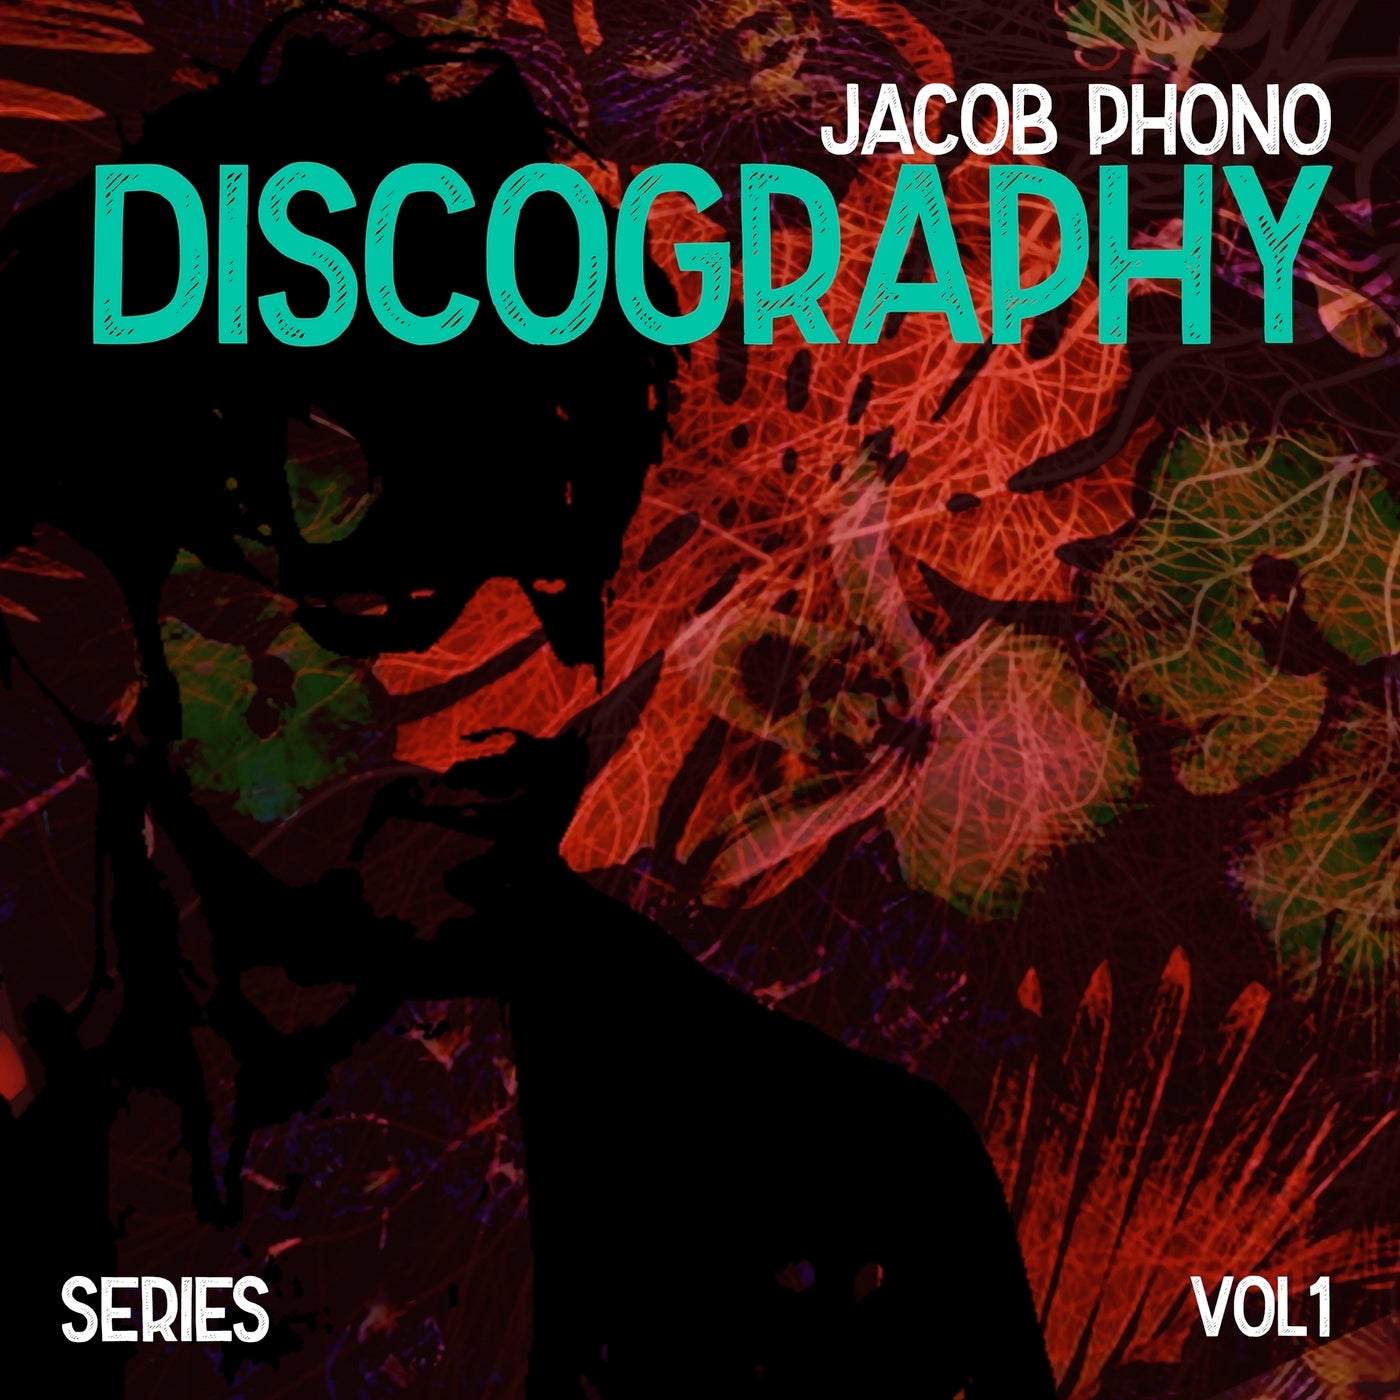 Jacob Phono - Songs, Events and Music Stats